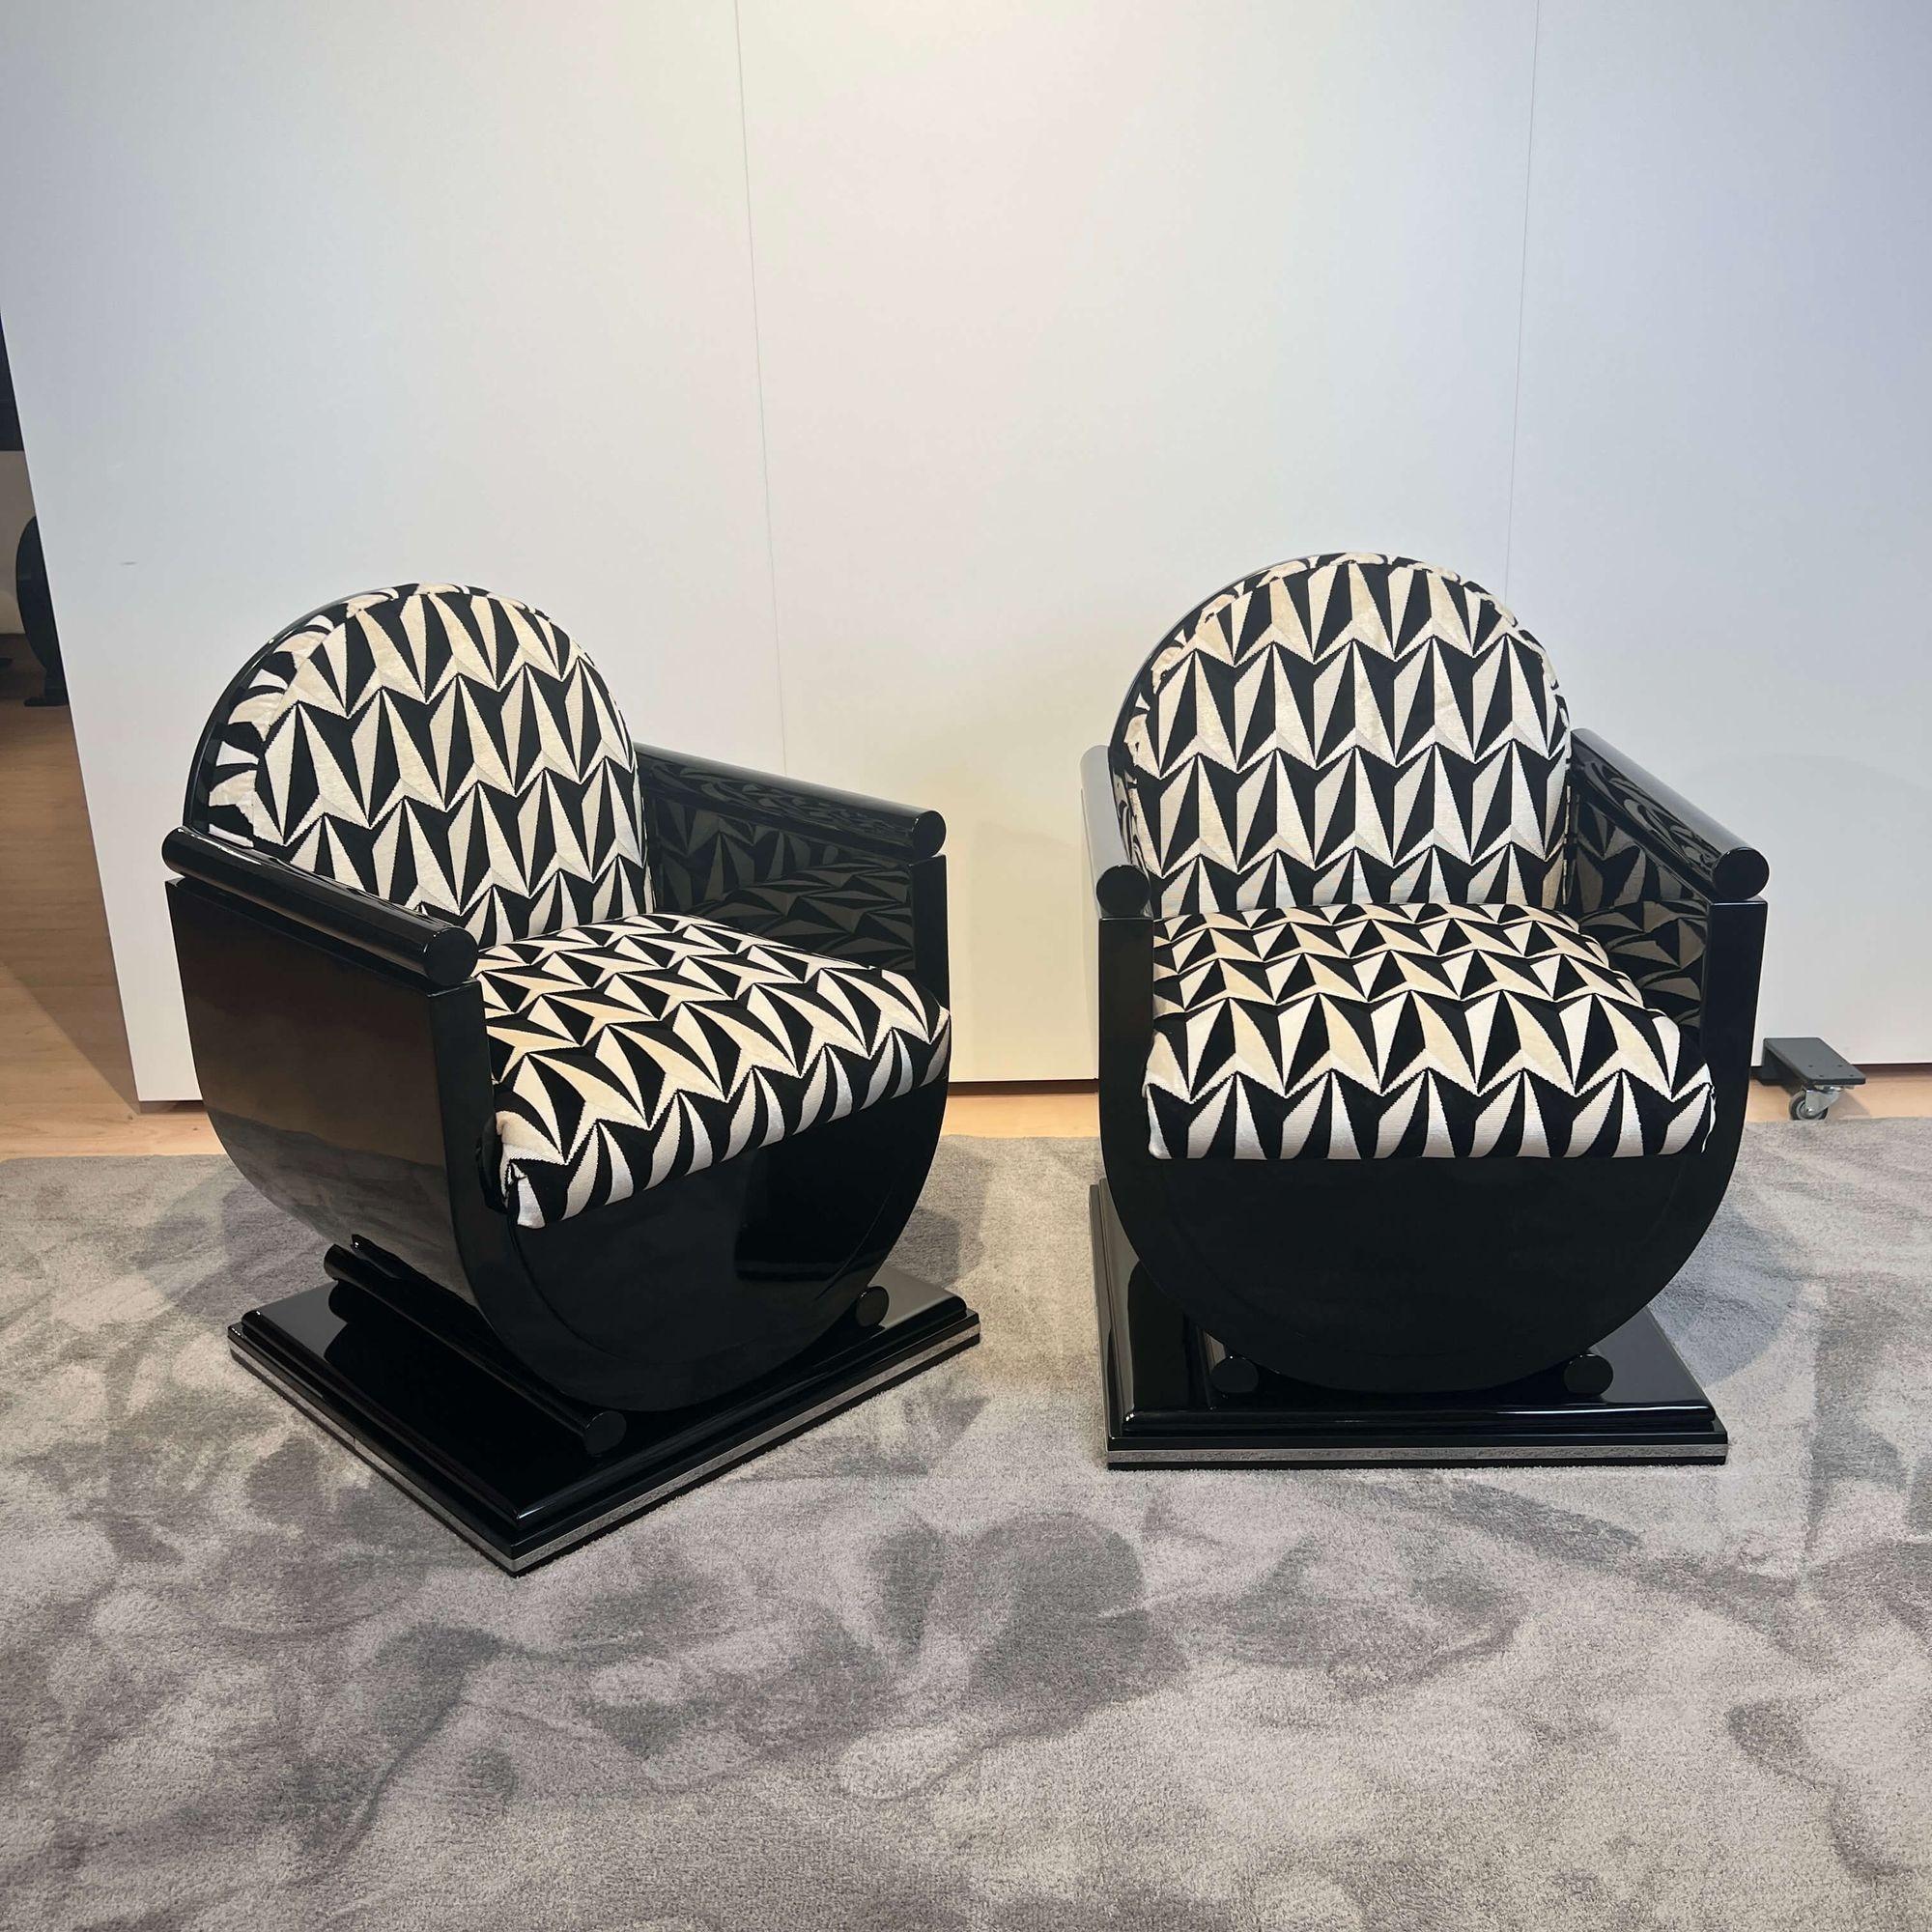 A beautiful pair of small french Art Deco style armchairs in shell form stemming from the 1950/60s.
Fully restored with black high gloss piano lacquer on solid hardwood underneath. Polished stainless steel trims around the legs.
Newly upholstered